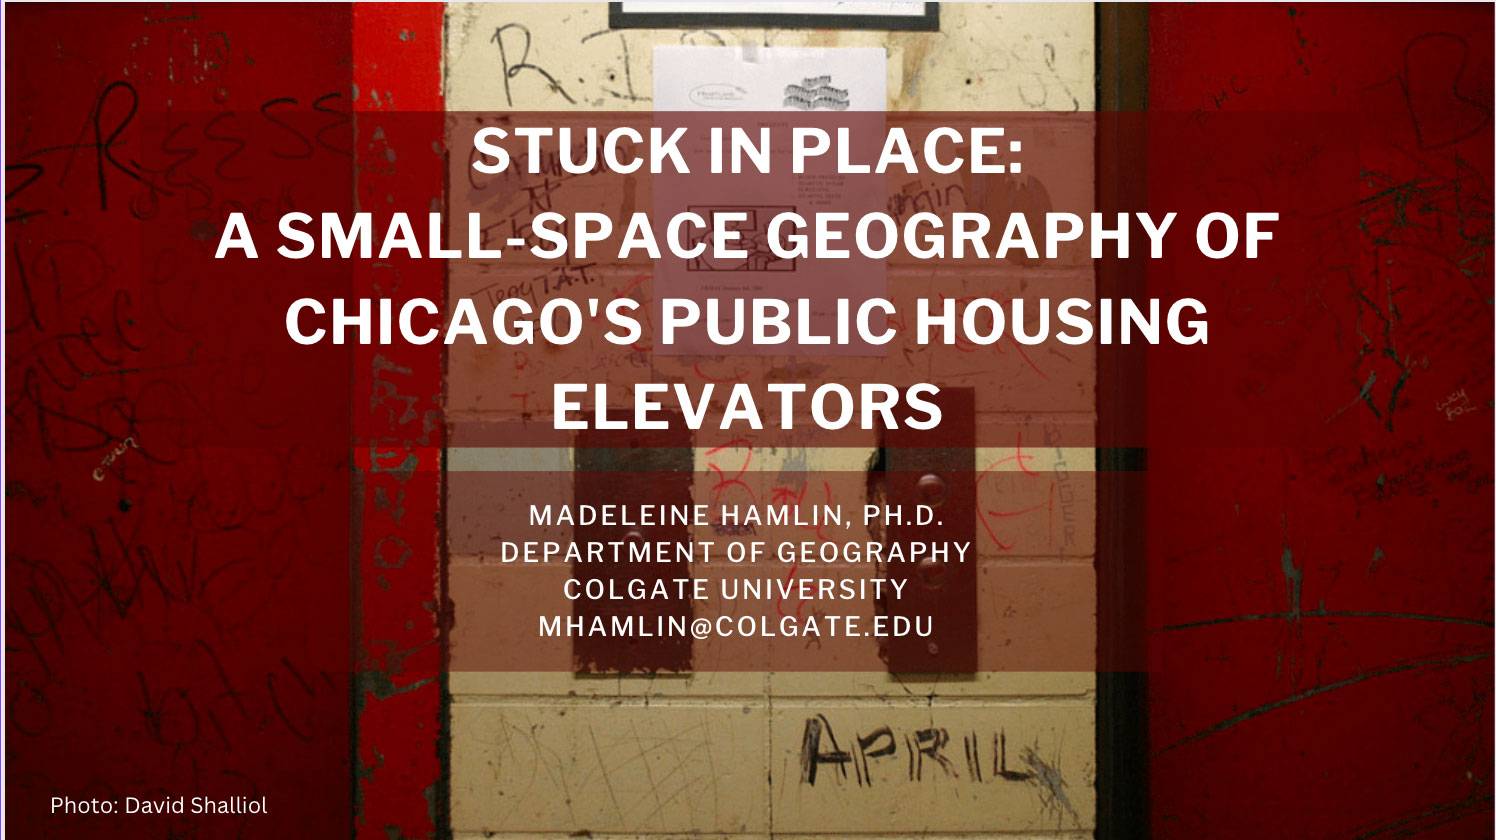 Poster for "Stuck in Place: A Small-Space Geography of Chicago's Public Housing Elevators"